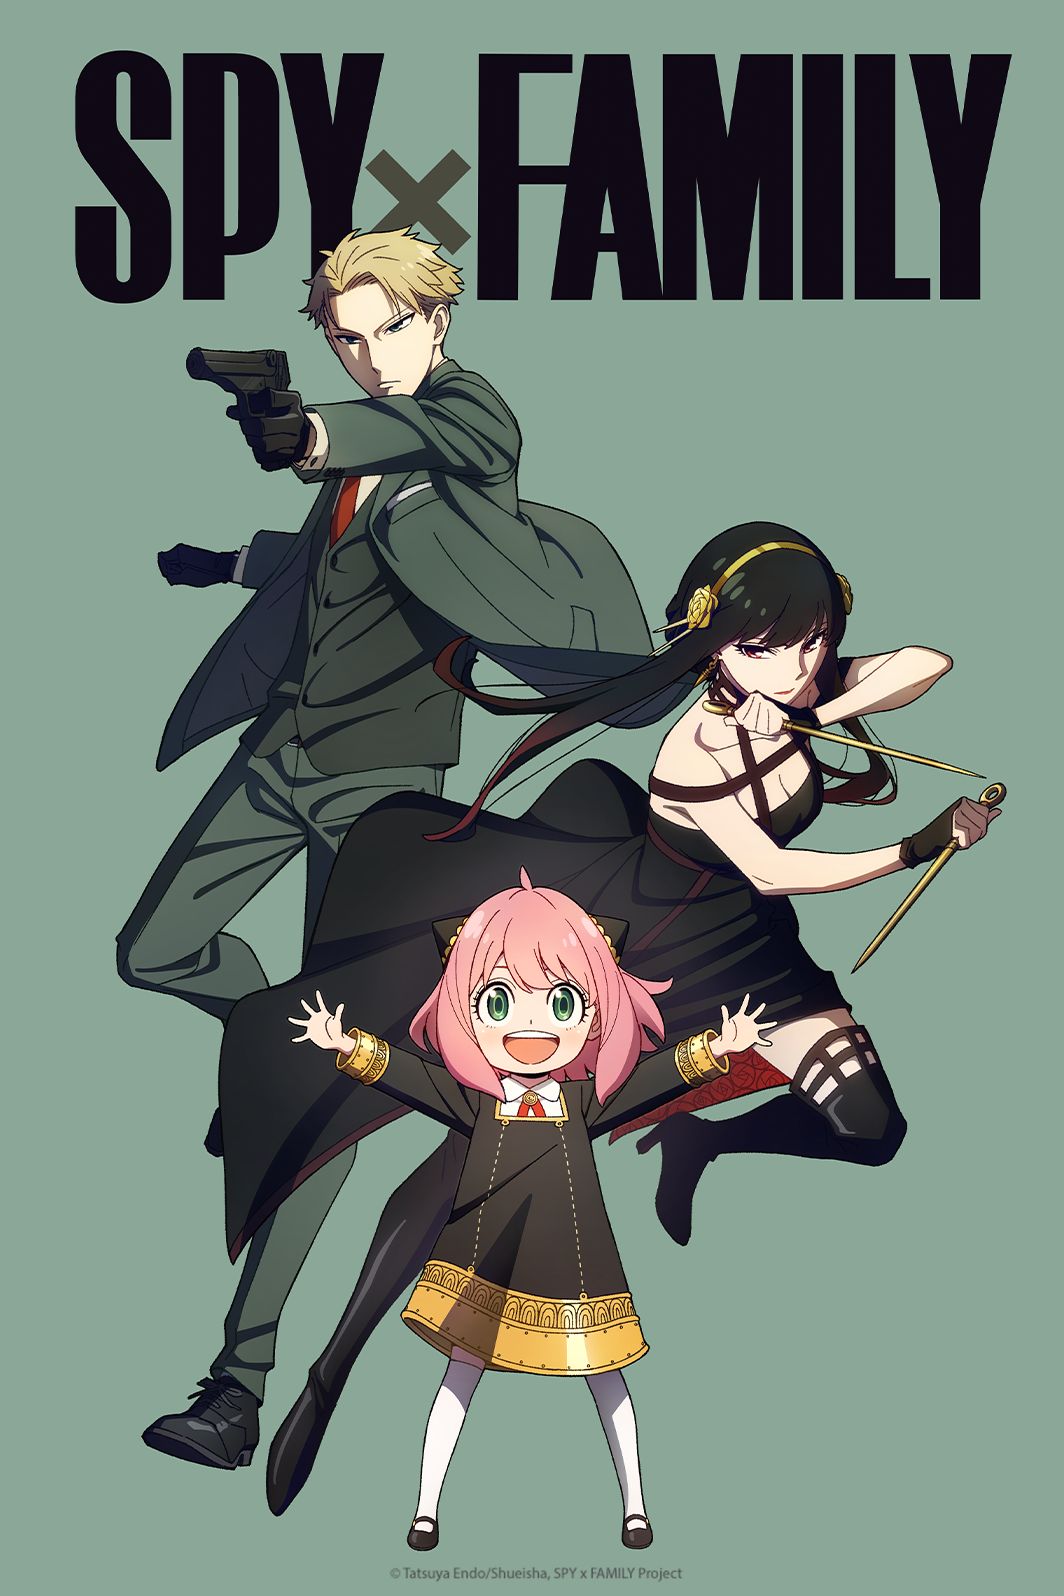 SPY x FAMILY Part 2 Episode 12 Release Date and Time on Crunchyroll   GameRevolution